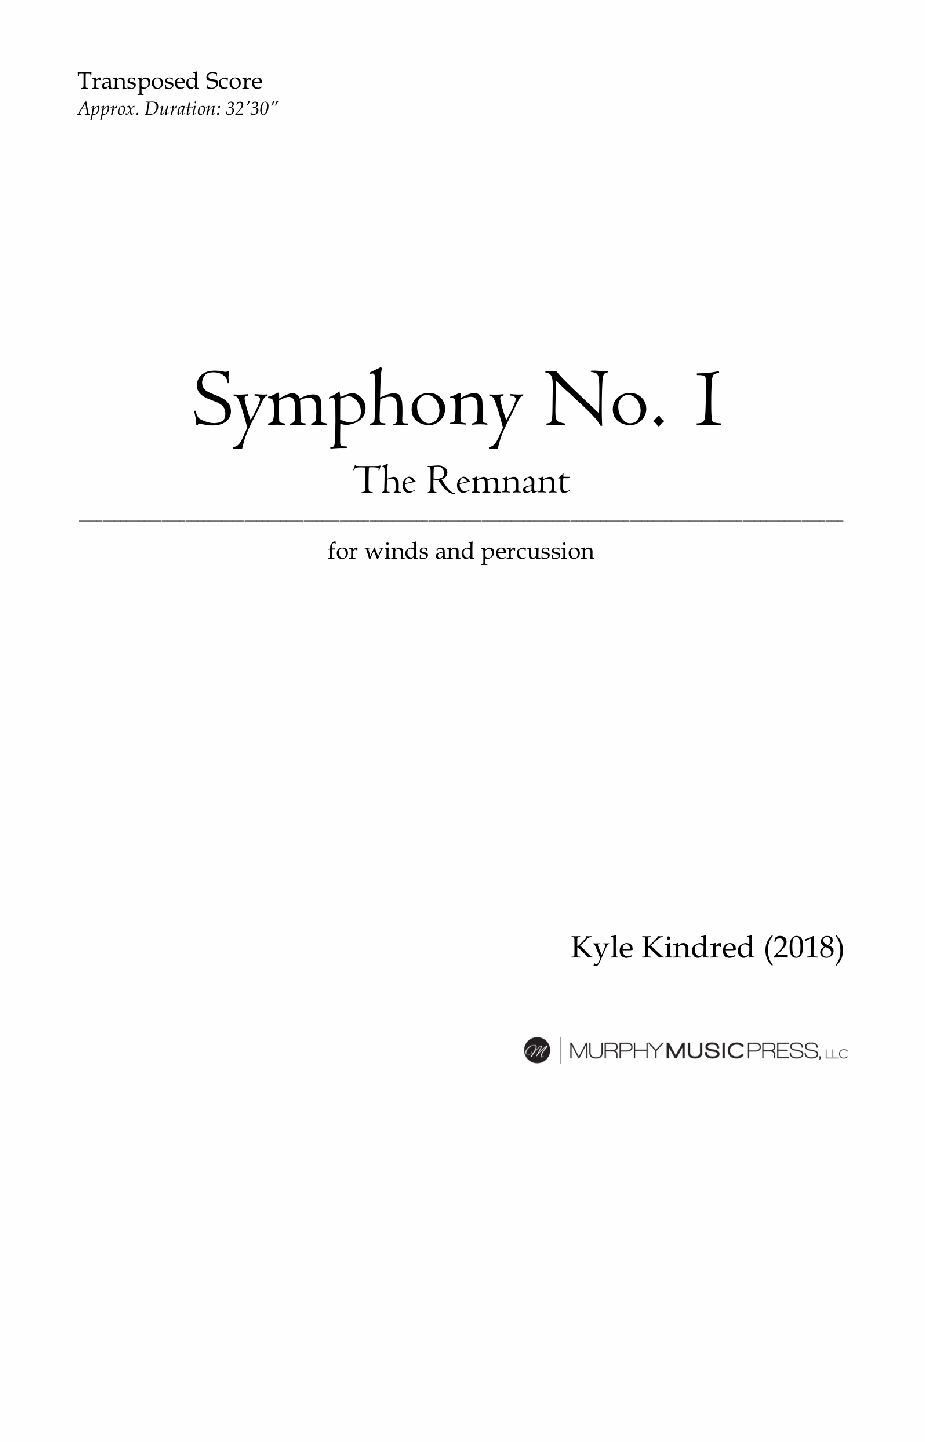 Symphony No. 1, The Remnant (score Only) by Kyle Kindred 